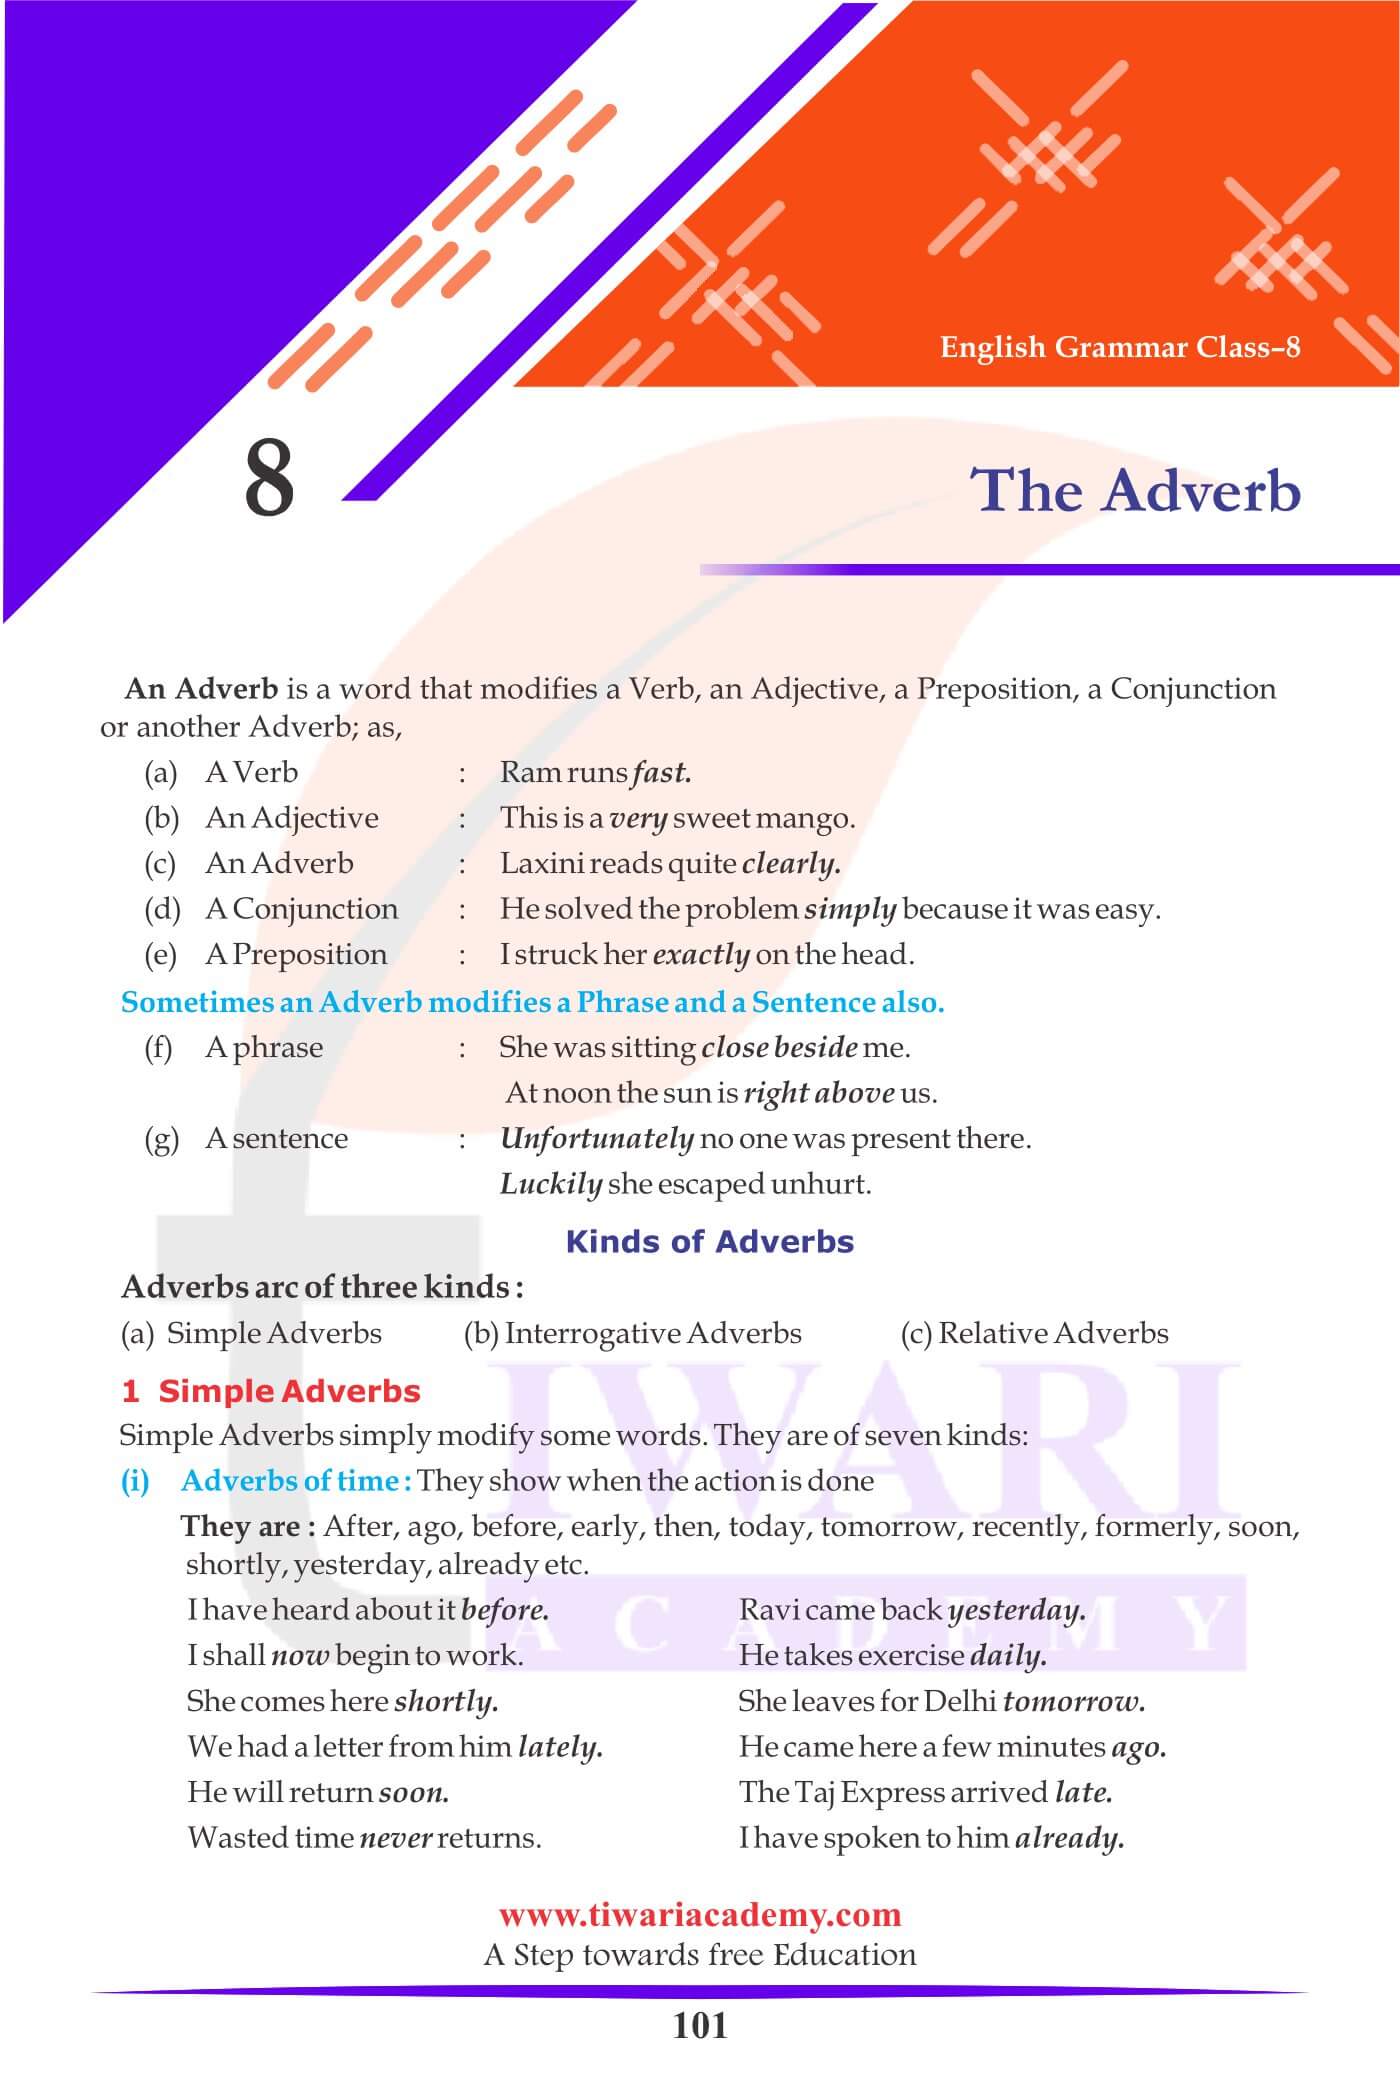 Class 8 English Grammar Chapter 8 The Adverb